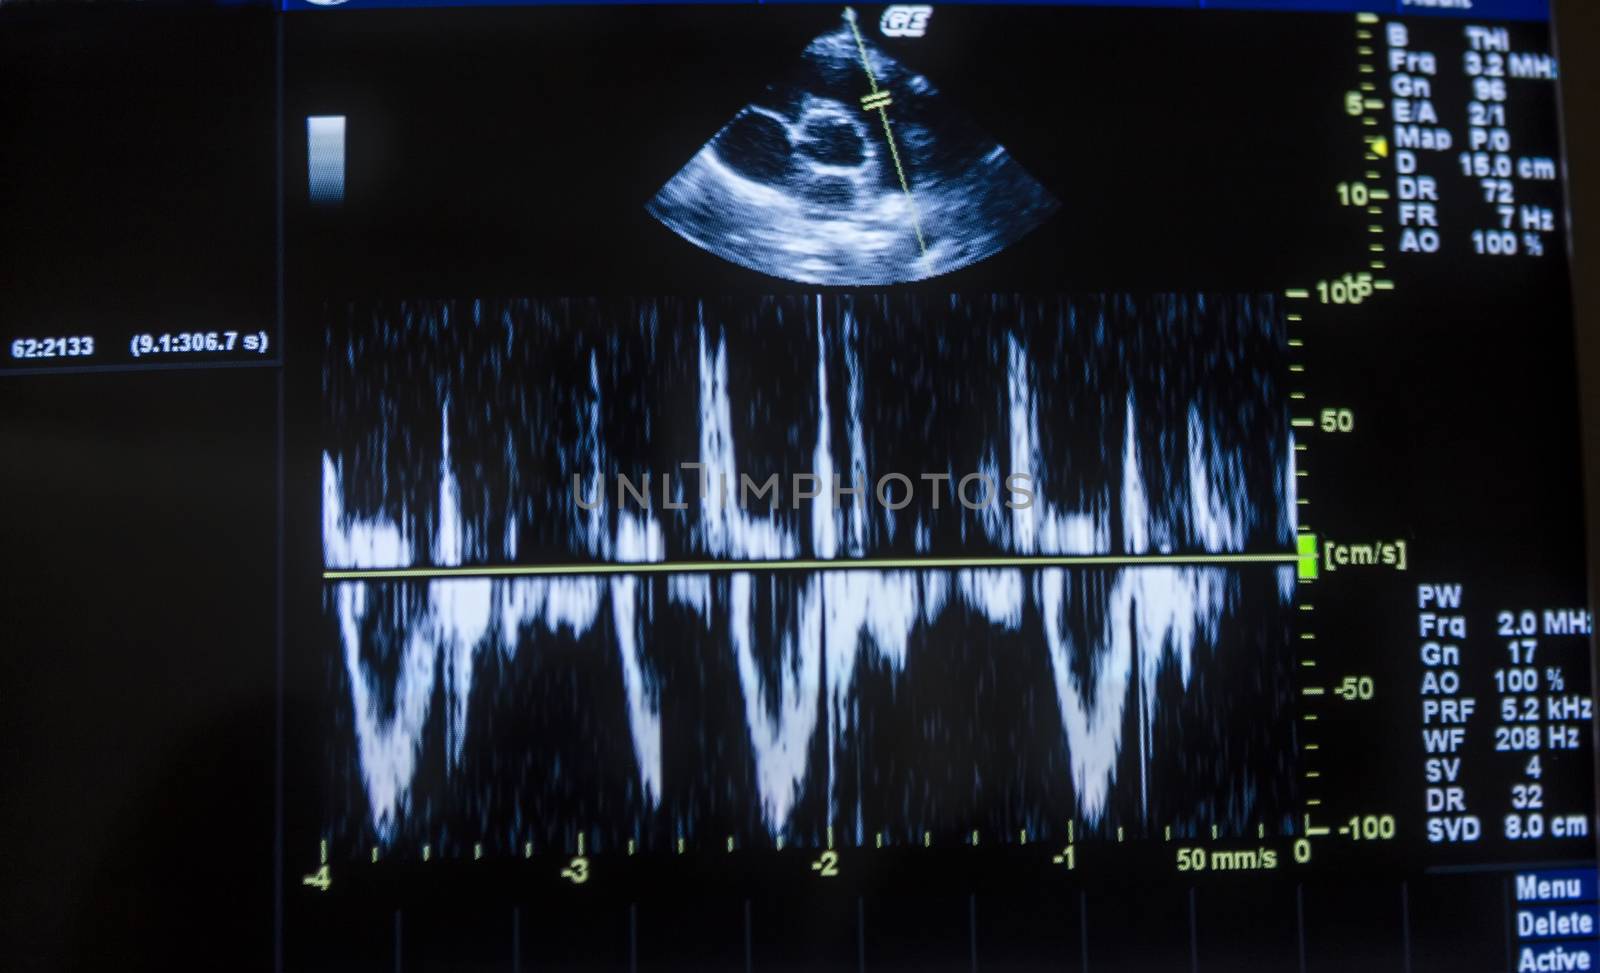 Heart ultrasound image on computer screen and cardiogram. by ververidis